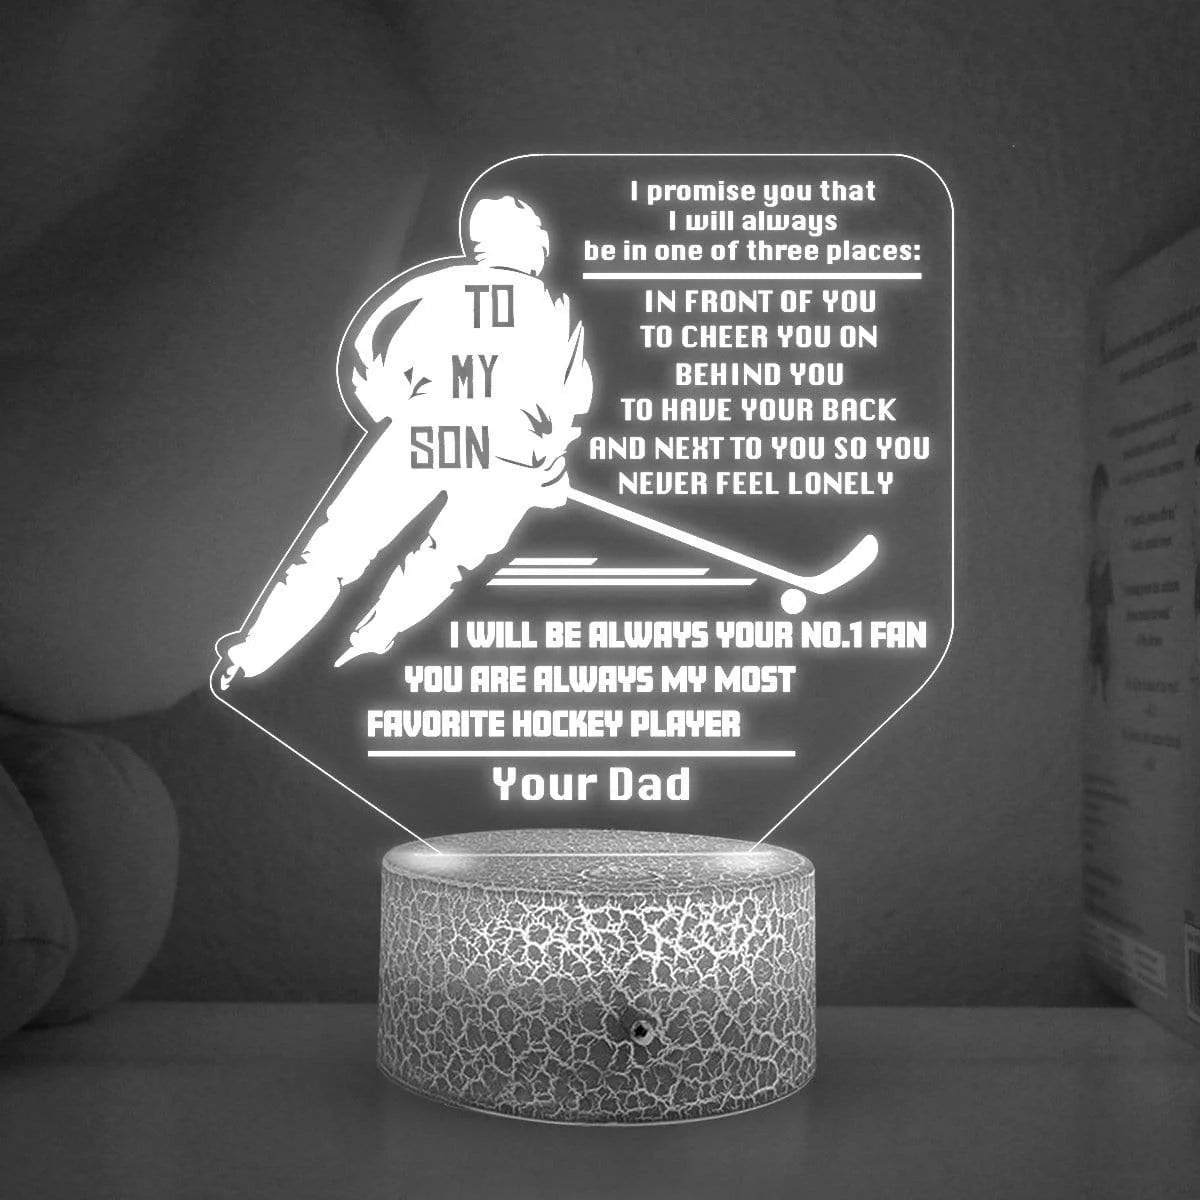 Illuminating 3D LED light engraved with a special message for a son from his dad